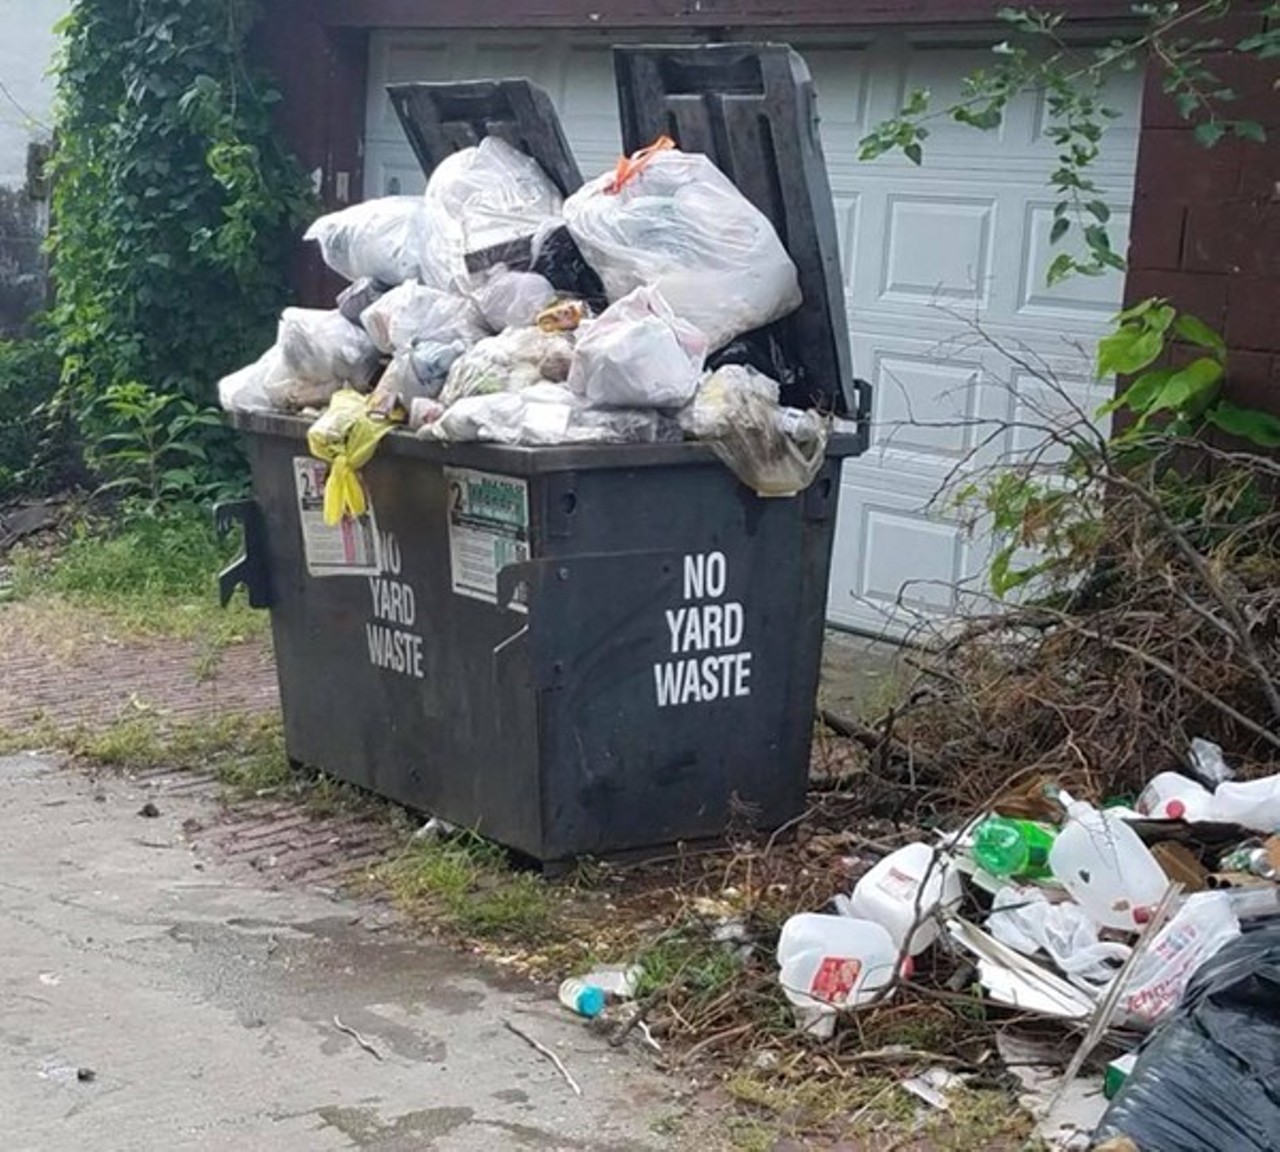 The city privatizing literally everything to pay for one working garbage truck.
Soon every road will be a toll road, mark our words.
Photo courtesy of Cara Spencer